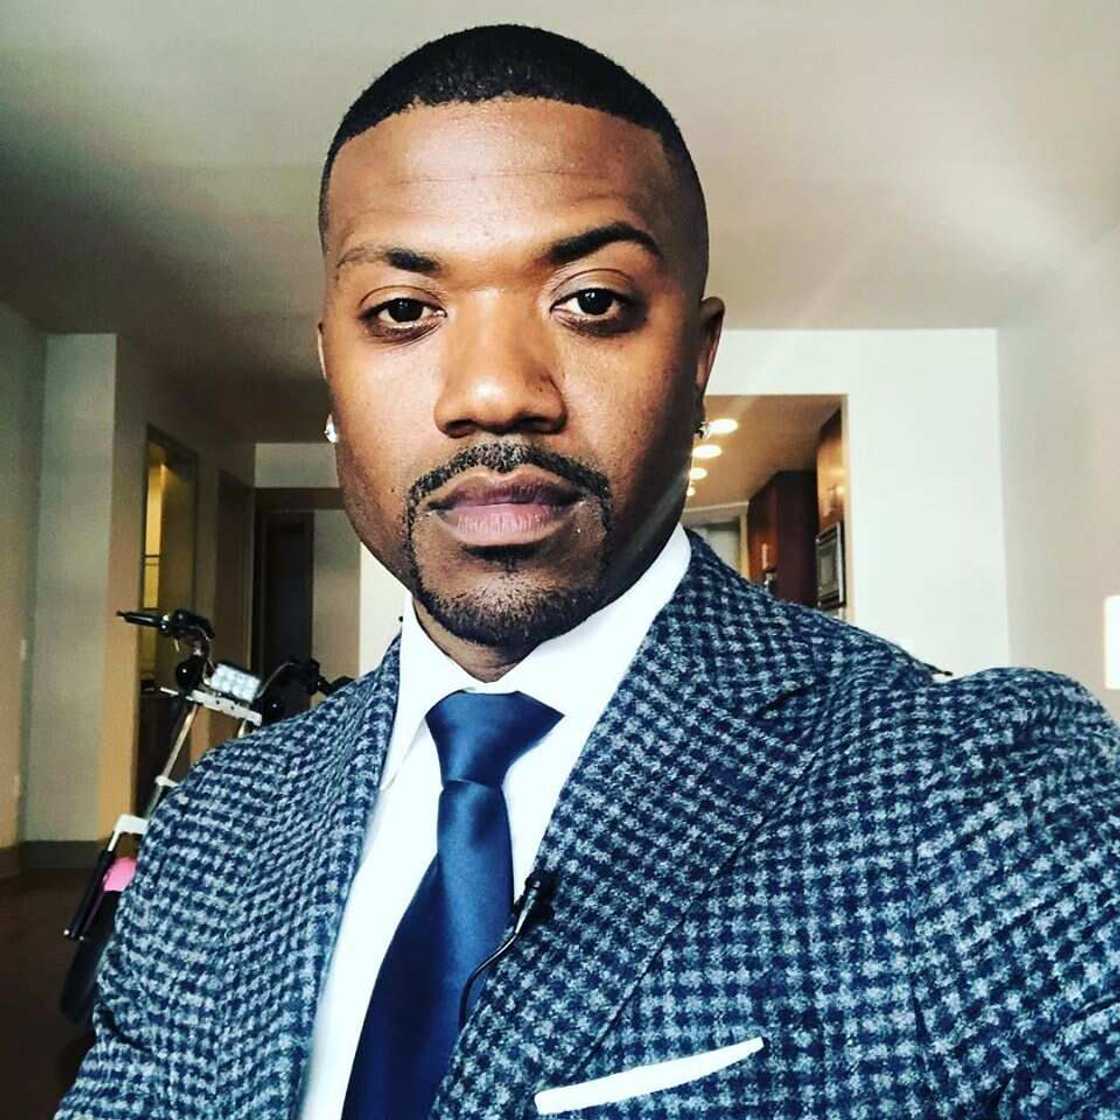 How did Ray J become famous?